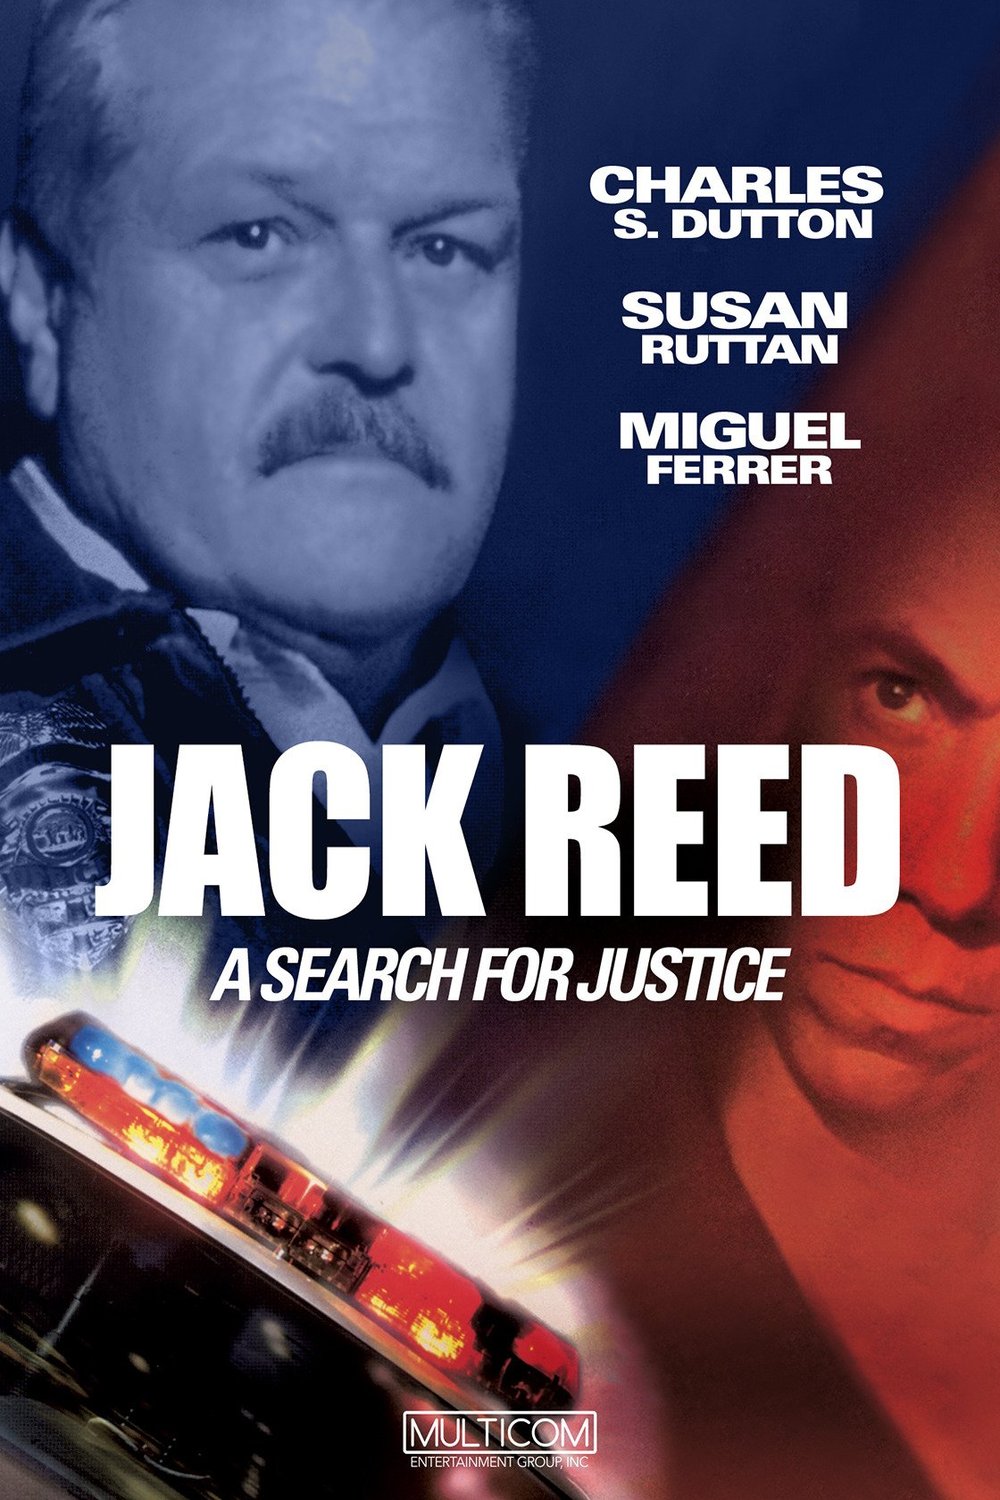 Poster of the movie Jack Reed: A Search for Justice